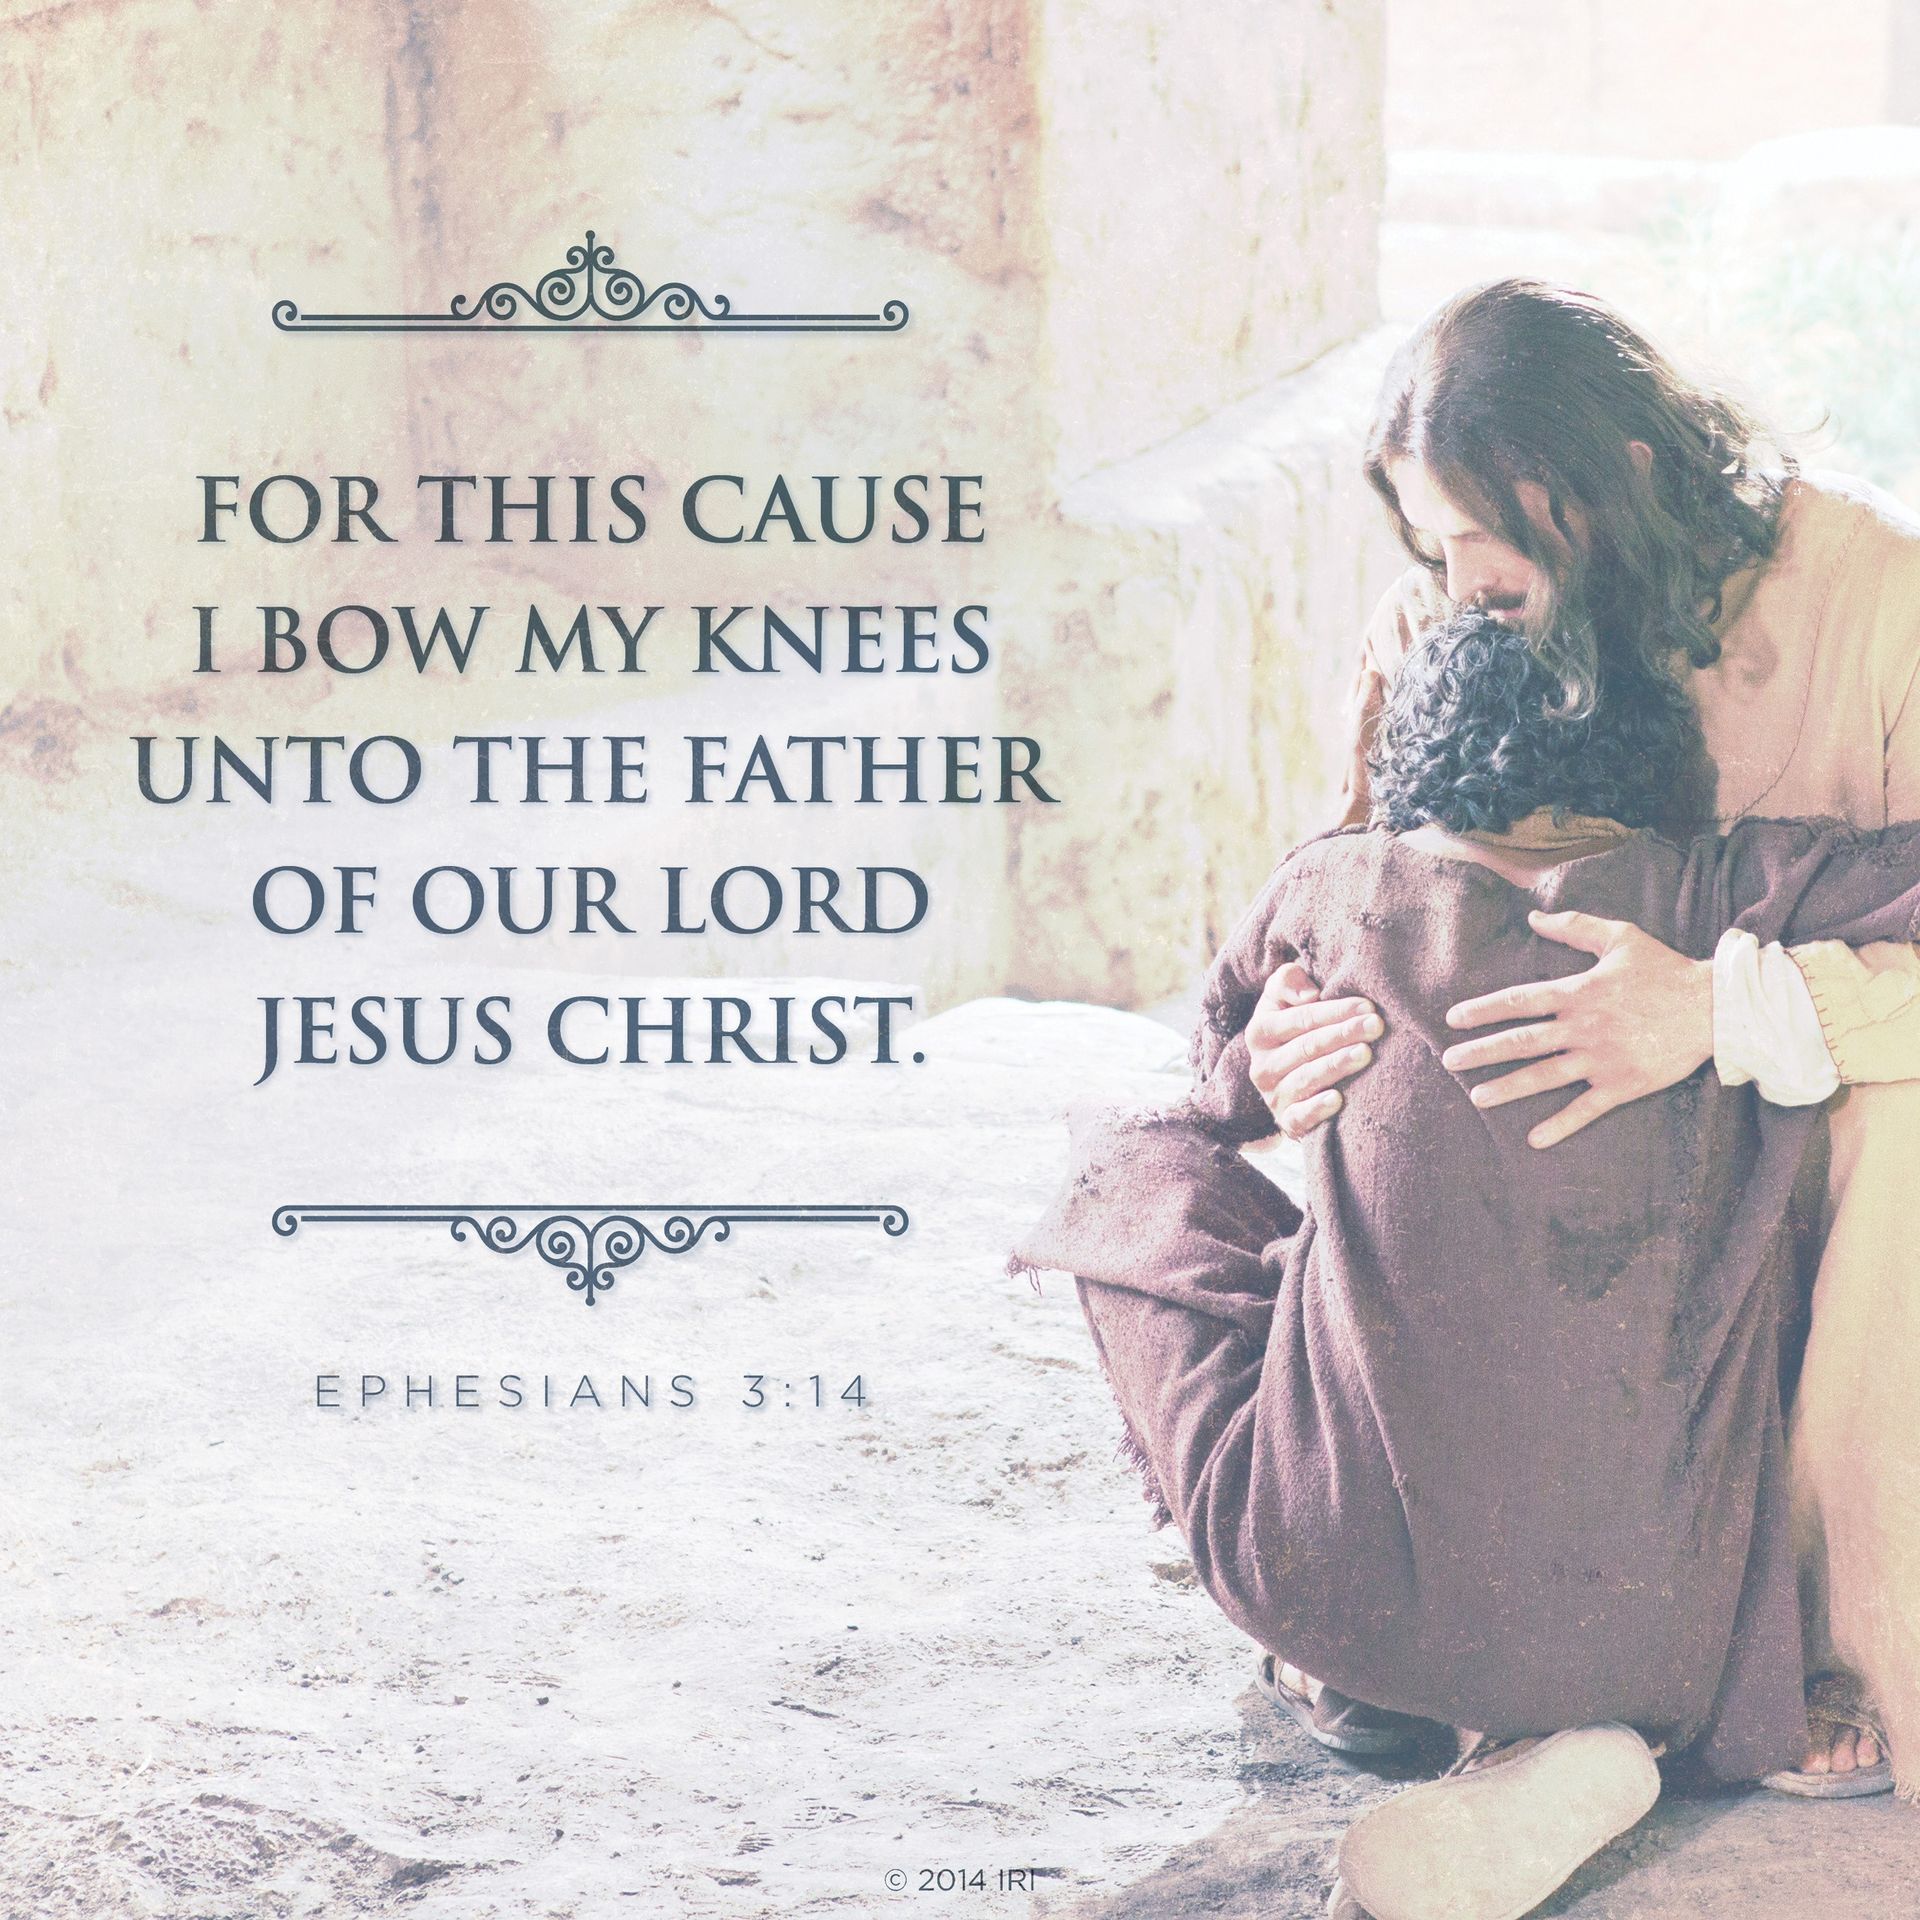 “For this cause I bow my knees unto the Father of our Lord Jesus Christ.”—Ephesians 3:14